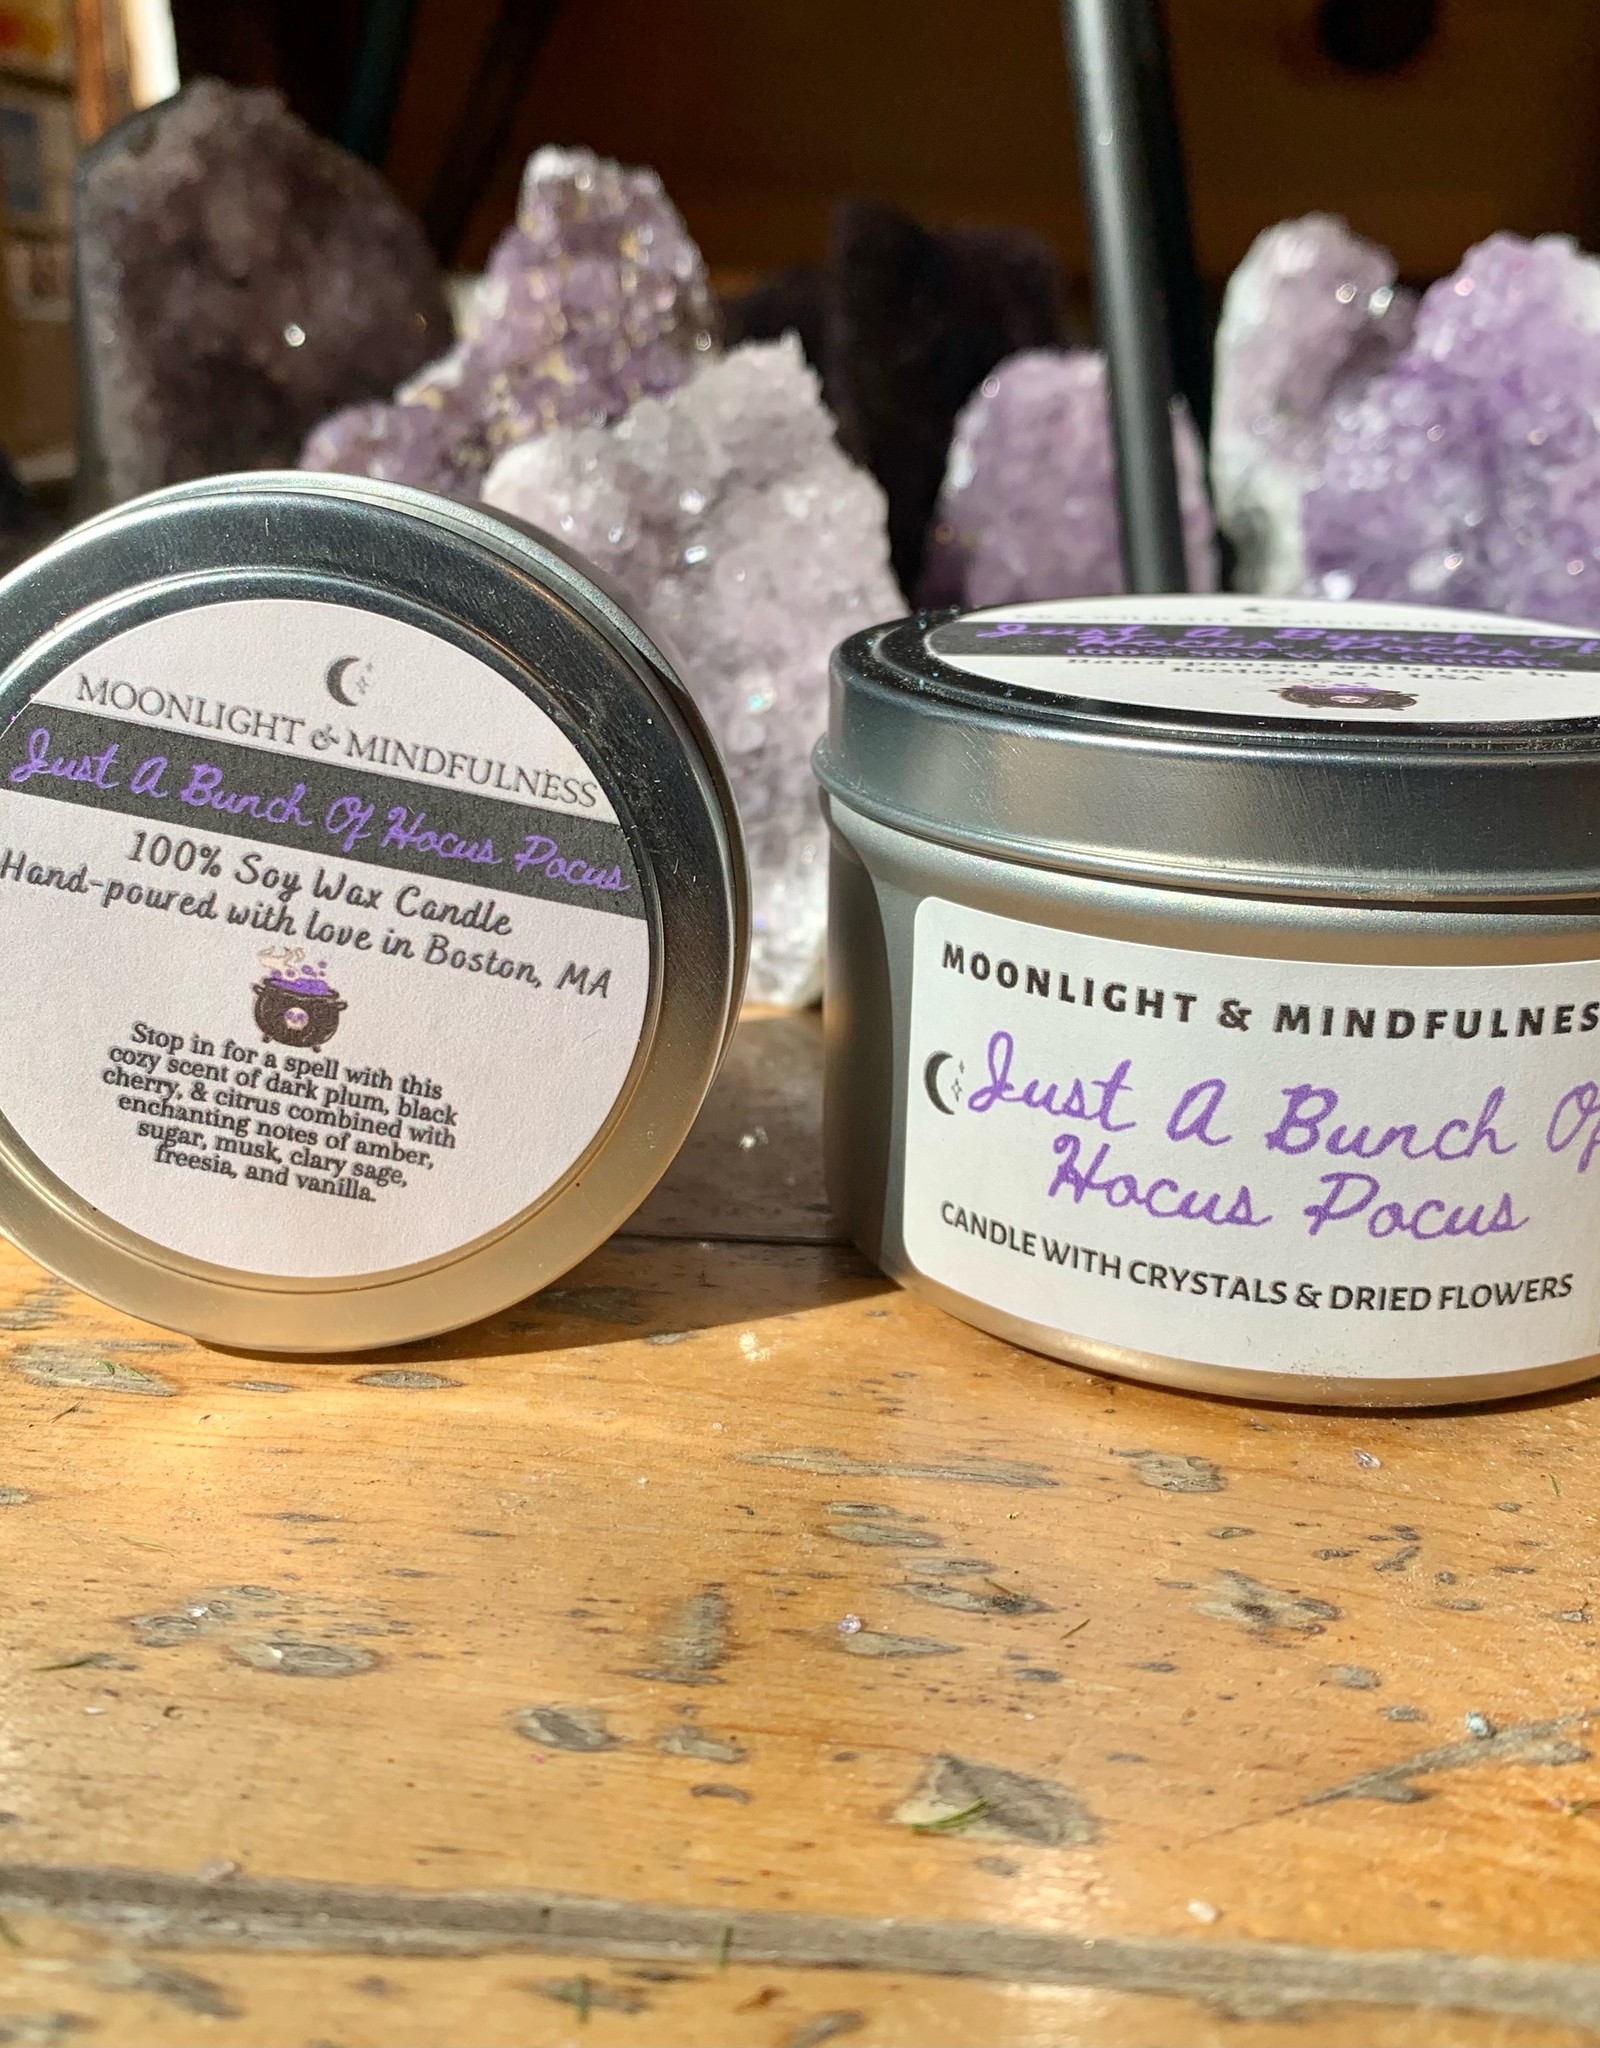 Moonlight and Minfulness Just a Bunch of Hocus Pocus 4oz Candle